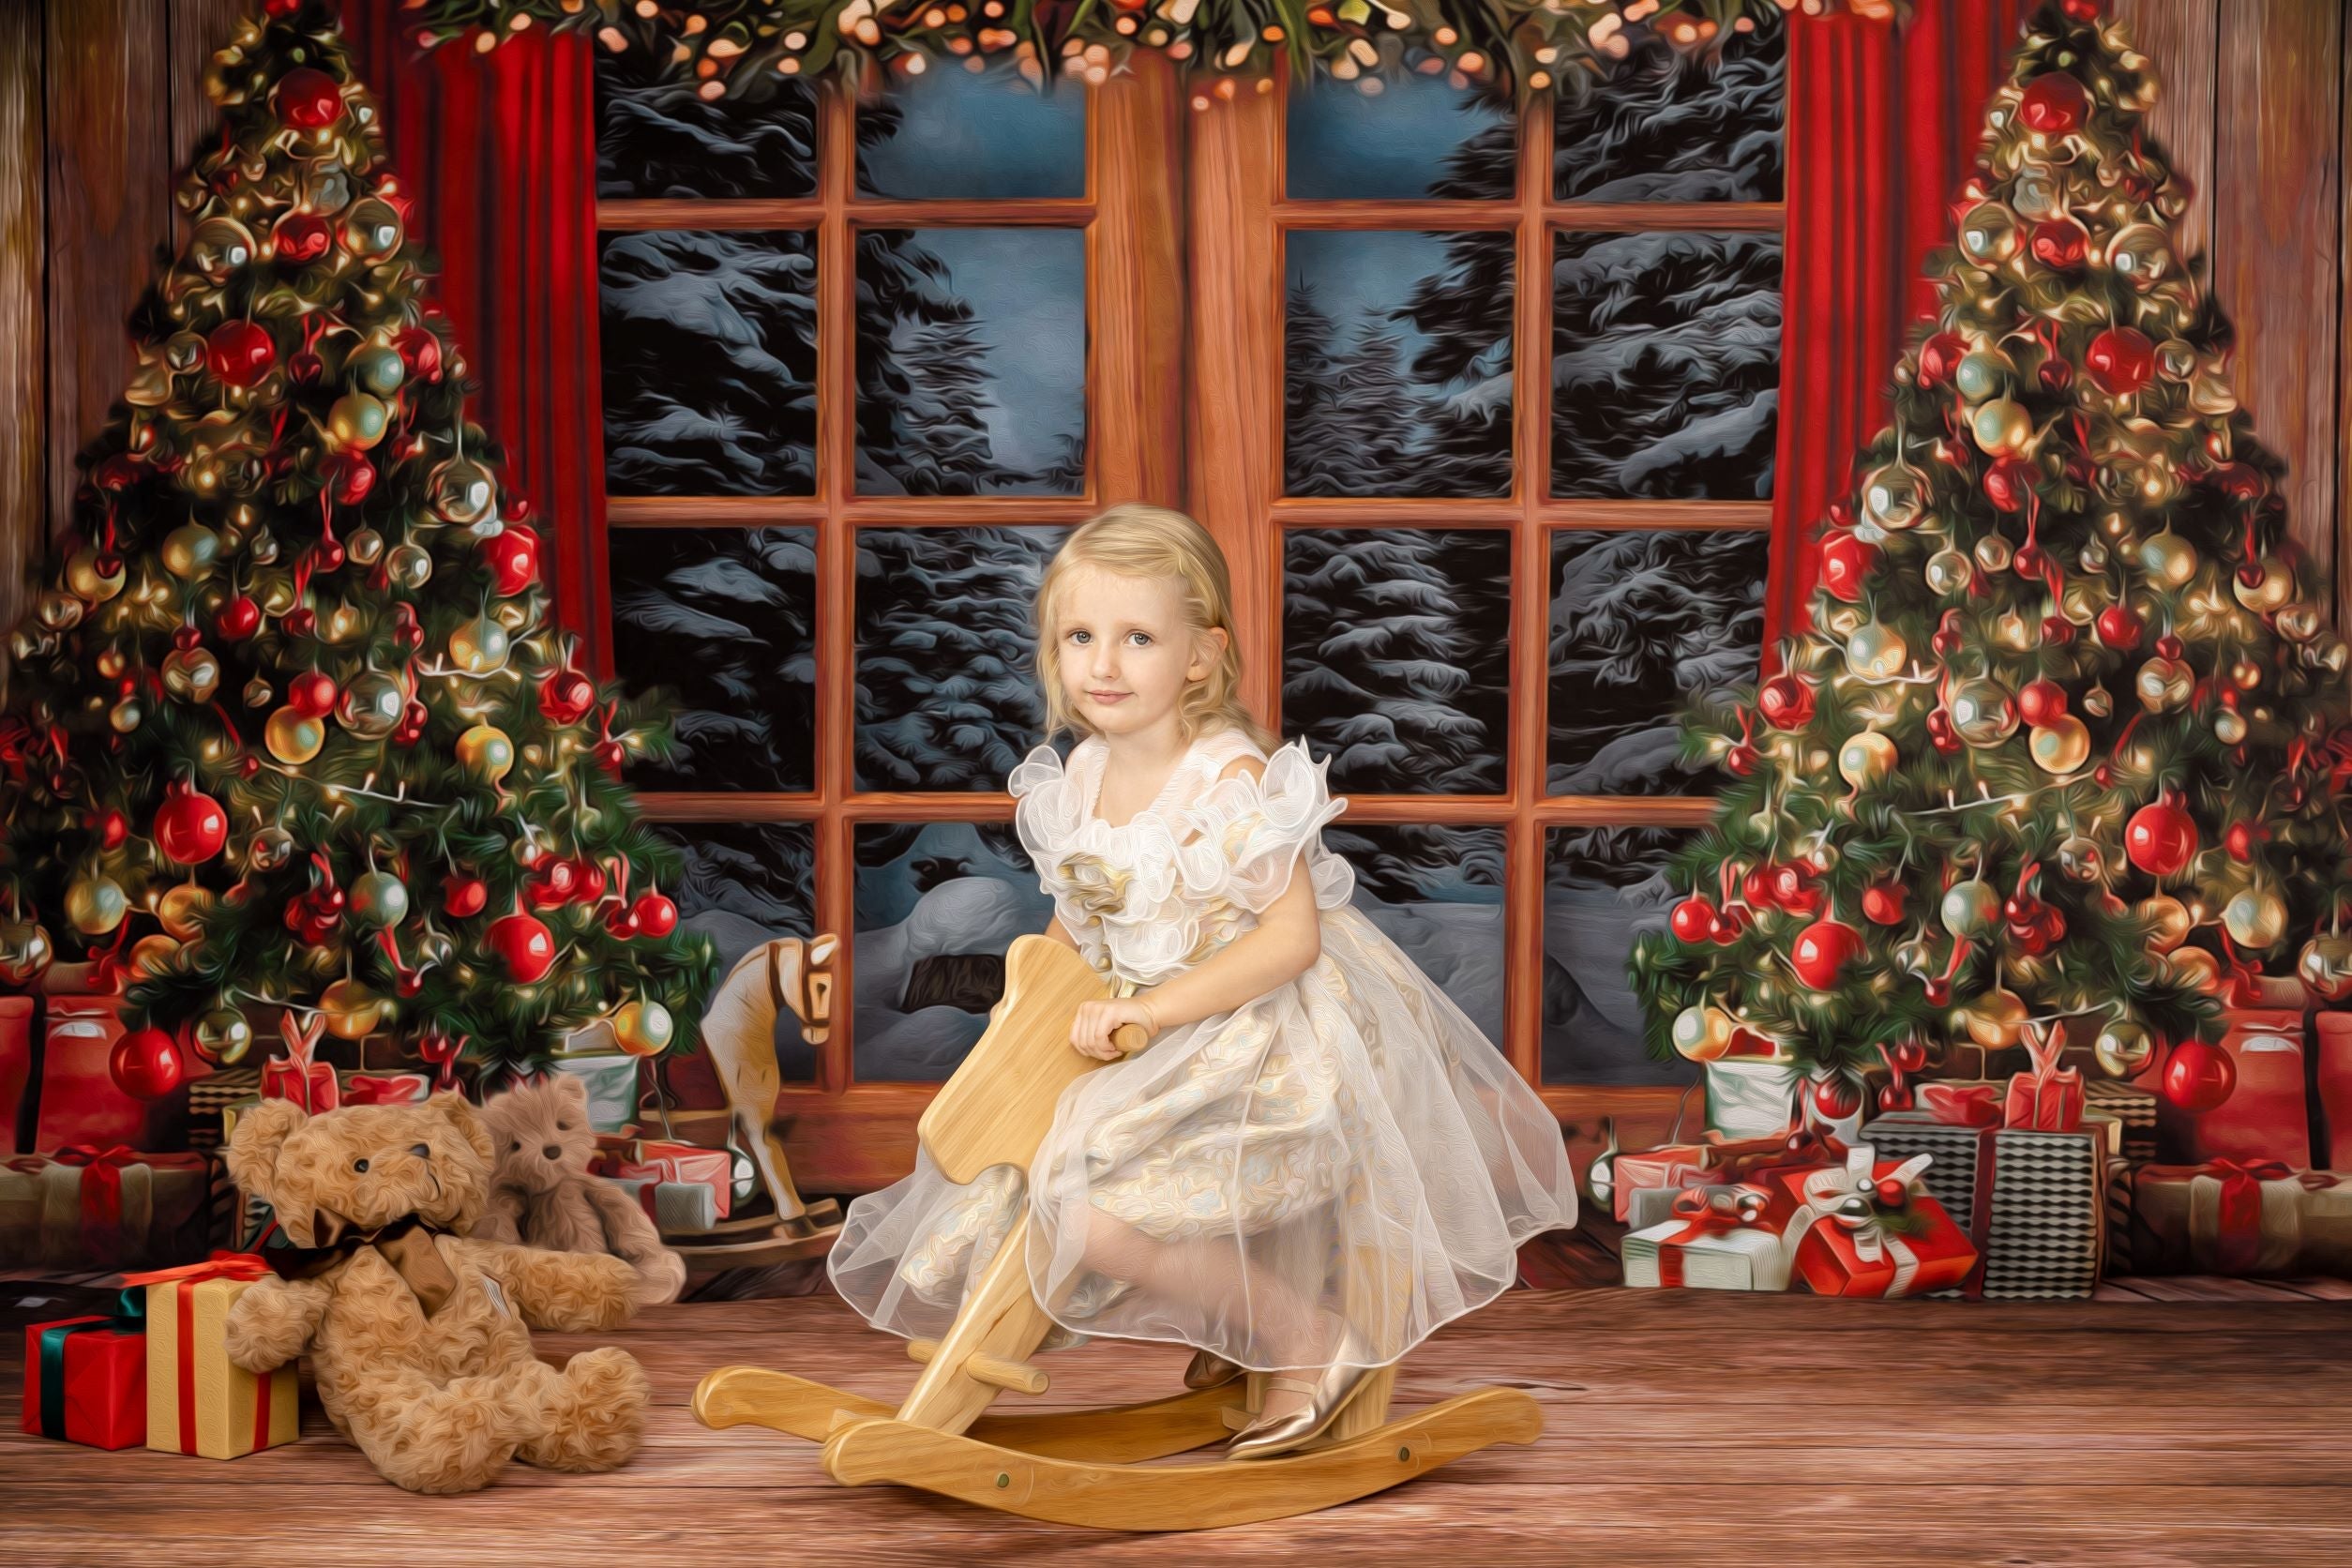 RTS Kate Christmas Backdrop Window Vintage Wood Tree for Photography